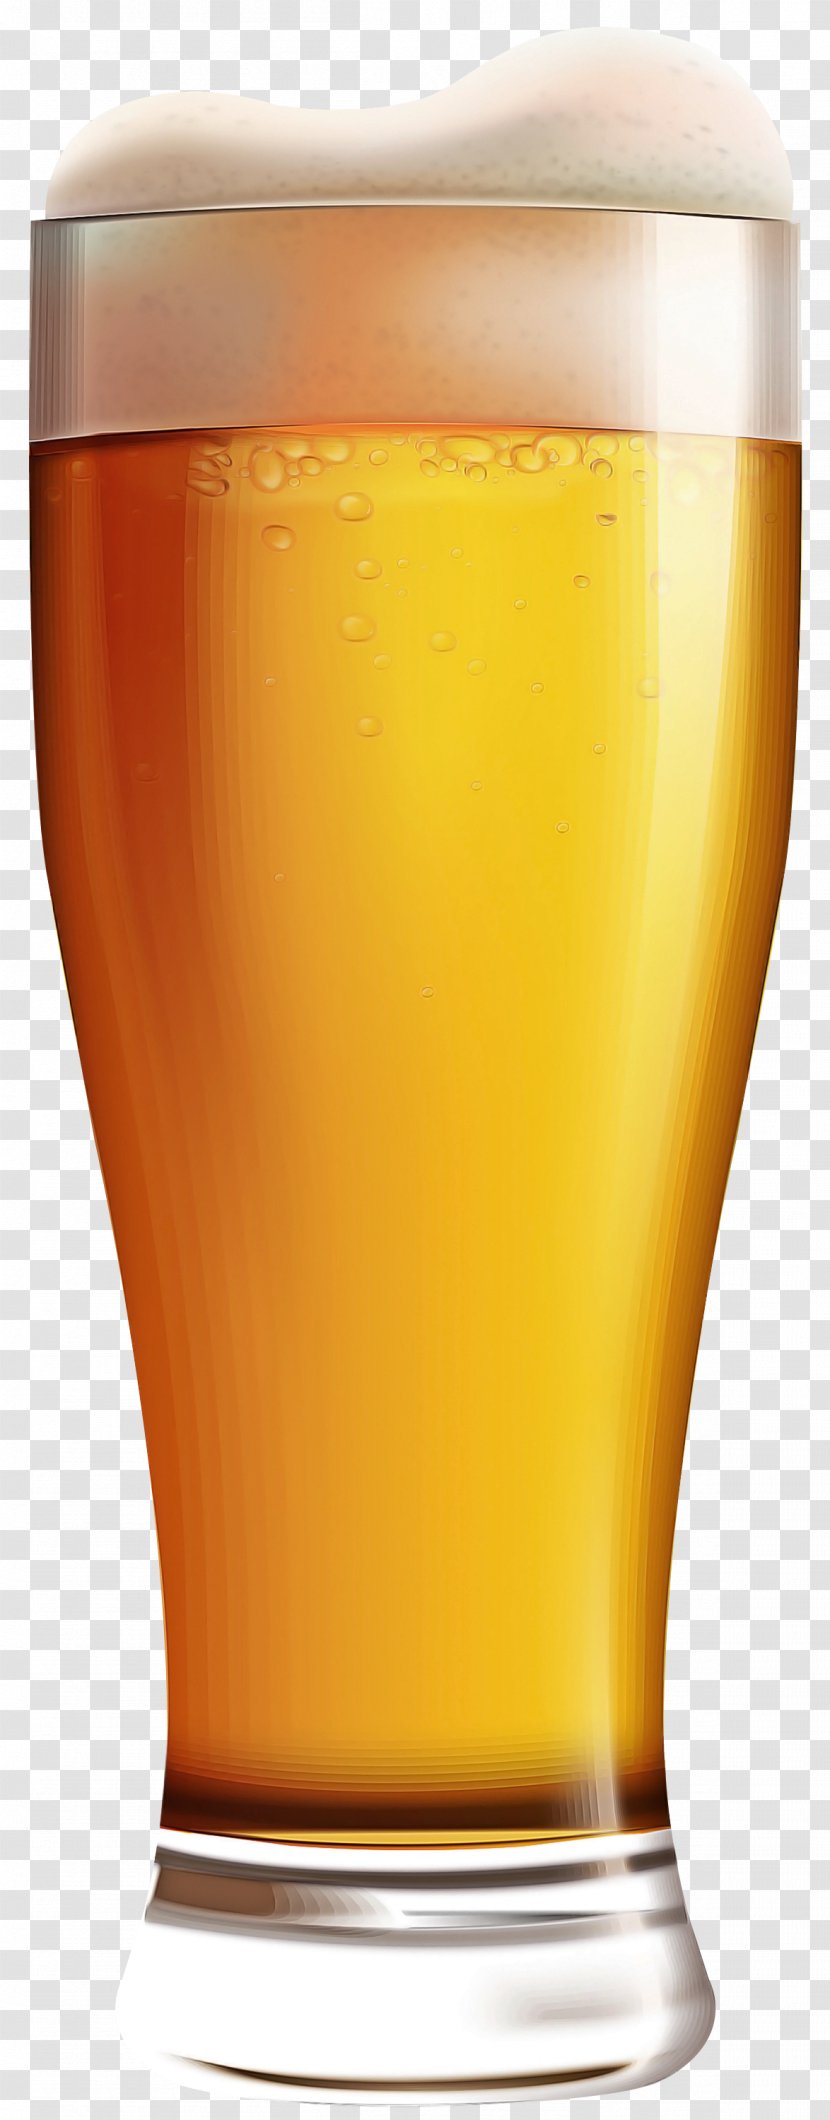 Beer Glass Pint Drink Juice Yellow - Nonalcoholic Beverage Alcoholic Transparent PNG